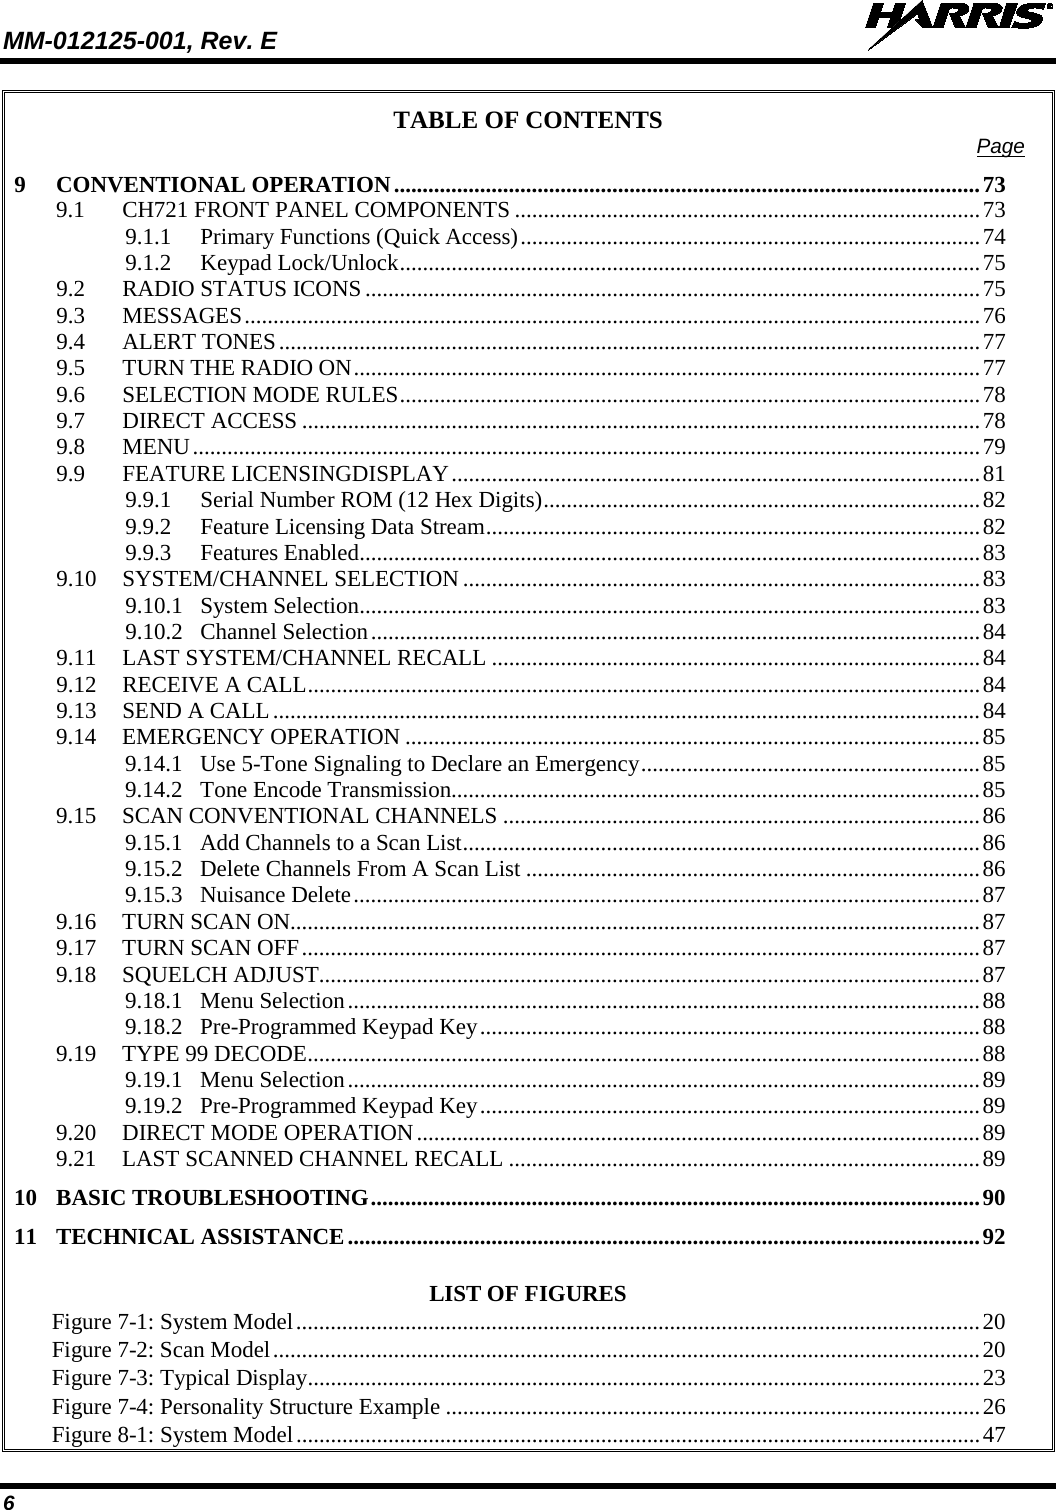 MM-012125-001, Rev. E   6 TABLE OF CONTENTS Page 9 CONVENTIONAL OPERATION ...................................................................................................... 73 9.1 CH721 FRONT PANEL COMPONENTS ................................................................................. 73 9.1.1 Primary Functions (Quick Access) ................................................................................ 74 9.1.2 Keypad Lock/Unlock ..................................................................................................... 75 9.2 RADIO STATUS ICONS ........................................................................................................... 75 9.3 MESSAGES ................................................................................................................................ 76 9.4 ALERT TONES .......................................................................................................................... 77 9.5 TURN THE RADIO ON ............................................................................................................. 77 9.6 SELECTION MODE RULES ..................................................................................................... 78 9.7 DIRECT ACCESS ...................................................................................................................... 78 9.8 MENU ......................................................................................................................................... 79 9.9 FEATURE LICENSINGDISPLAY ............................................................................................ 81 9.9.1 Serial Number ROM (12 Hex Digits) ............................................................................ 82 9.9.2 Feature Licensing Data Stream ...................................................................................... 82 9.9.3 Features Enabled ............................................................................................................ 83 9.10 SYSTEM/CHANNEL SELECTION .......................................................................................... 83 9.10.1 System Selection ............................................................................................................ 83 9.10.2 Channel Selection .......................................................................................................... 84 9.11 LAST SYSTEM/CHANNEL RECALL ..................................................................................... 84 9.12 RECEIVE A CALL ..................................................................................................................... 84 9.13 SEND A CALL ........................................................................................................................... 84 9.14 EMERGENCY OPERATION .................................................................................................... 85 9.14.1 Use 5-Tone Signaling to Declare an Emergency ........................................................... 85 9.14.2 Tone Encode Transmission ............................................................................................ 85 9.15 SCAN CONVENTIONAL CHANNELS ................................................................................... 86 9.15.1 Add Channels to a Scan List .......................................................................................... 86 9.15.2 Delete Channels From A Scan List ............................................................................... 86 9.15.3 Nuisance Delete ............................................................................................................. 87 9.16 TURN SCAN ON........................................................................................................................ 87 9.17 TURN SCAN OFF ...................................................................................................................... 87 9.18 SQUELCH ADJUST................................................................................................................... 87 9.18.1 Menu Selection .............................................................................................................. 88 9.18.2 Pre-Programmed Keypad Key ....................................................................................... 88 9.19 TYPE 99 DECODE ..................................................................................................................... 88 9.19.1 Menu Selection .............................................................................................................. 89 9.19.2 Pre-Programmed Keypad Key ....................................................................................... 89 9.20 DIRECT MODE OPERATION .................................................................................................. 89 9.21 LAST SCANNED CHANNEL RECALL .................................................................................. 89 10 BASIC TROUBLESHOOTING .......................................................................................................... 90 11 TECHNICAL ASSISTANCE .............................................................................................................. 92  LIST OF FIGURES Figure 7-1: System Model ....................................................................................................................... 20 Figure 7-2: Scan Model ........................................................................................................................... 20 Figure 7-3: Typical Display ..................................................................................................................... 23 Figure 7-4: Personality Structure Example ............................................................................................. 26 Figure 8-1: System Model ....................................................................................................................... 47 